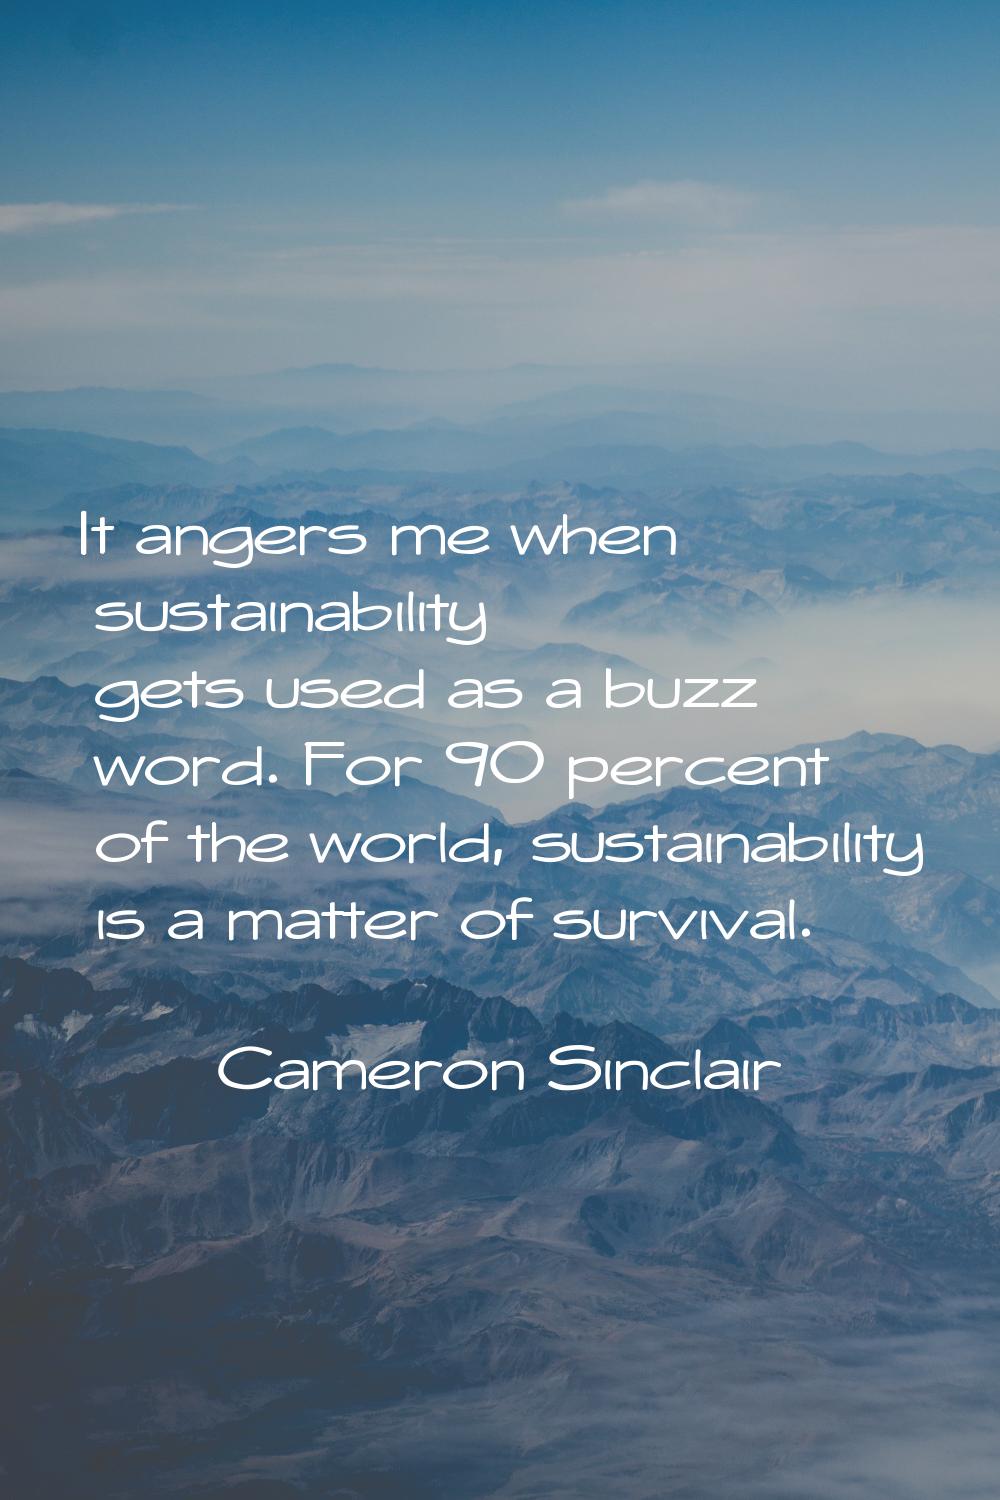 It angers me when sustainability gets used as a buzz word. For 90 percent of the world, sustainabil